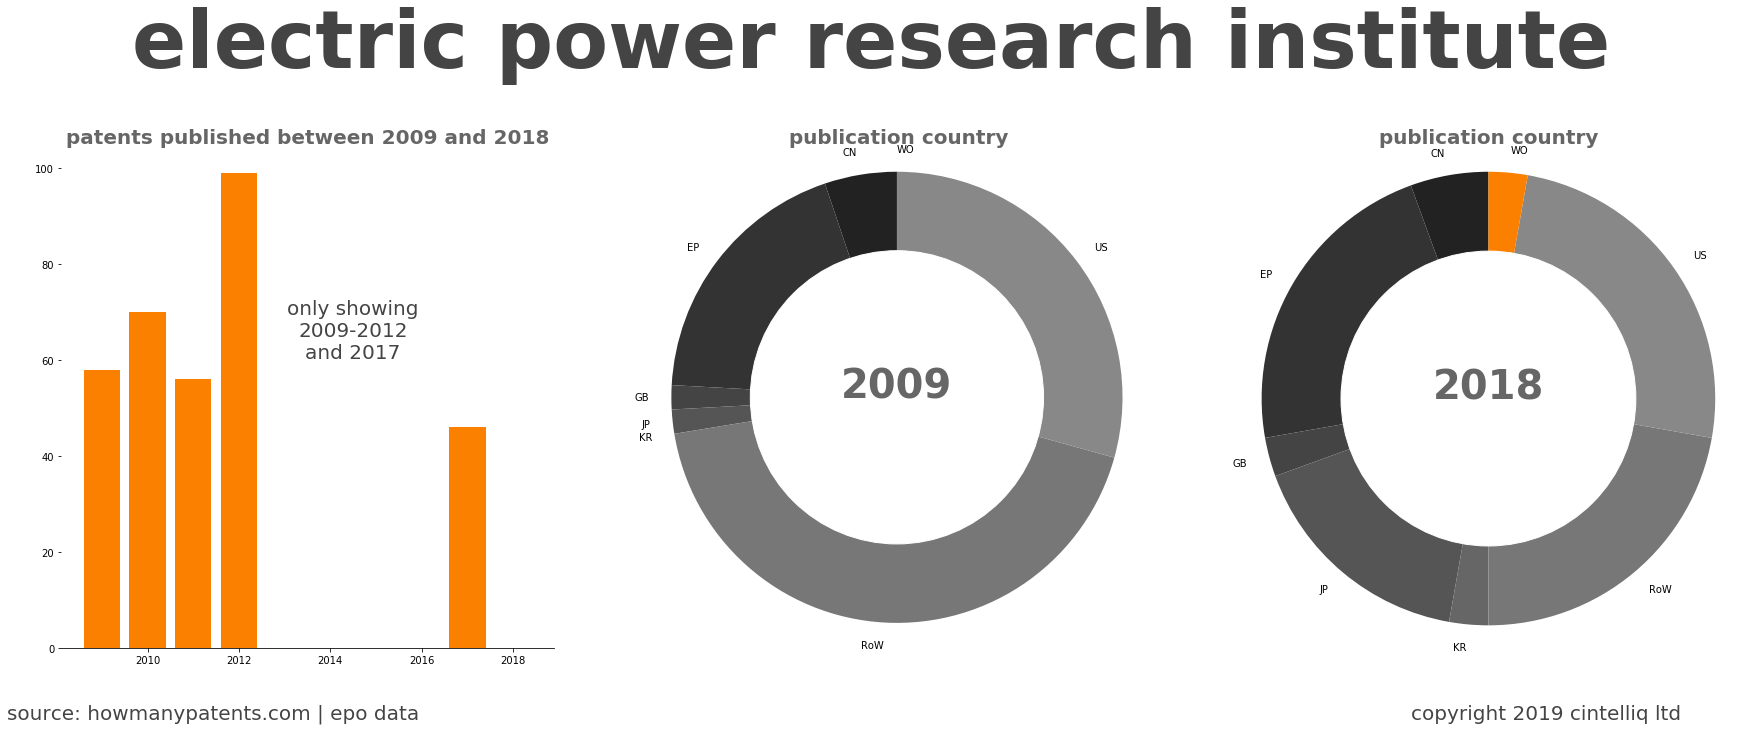 summary of patents for Electric Power Research Institute